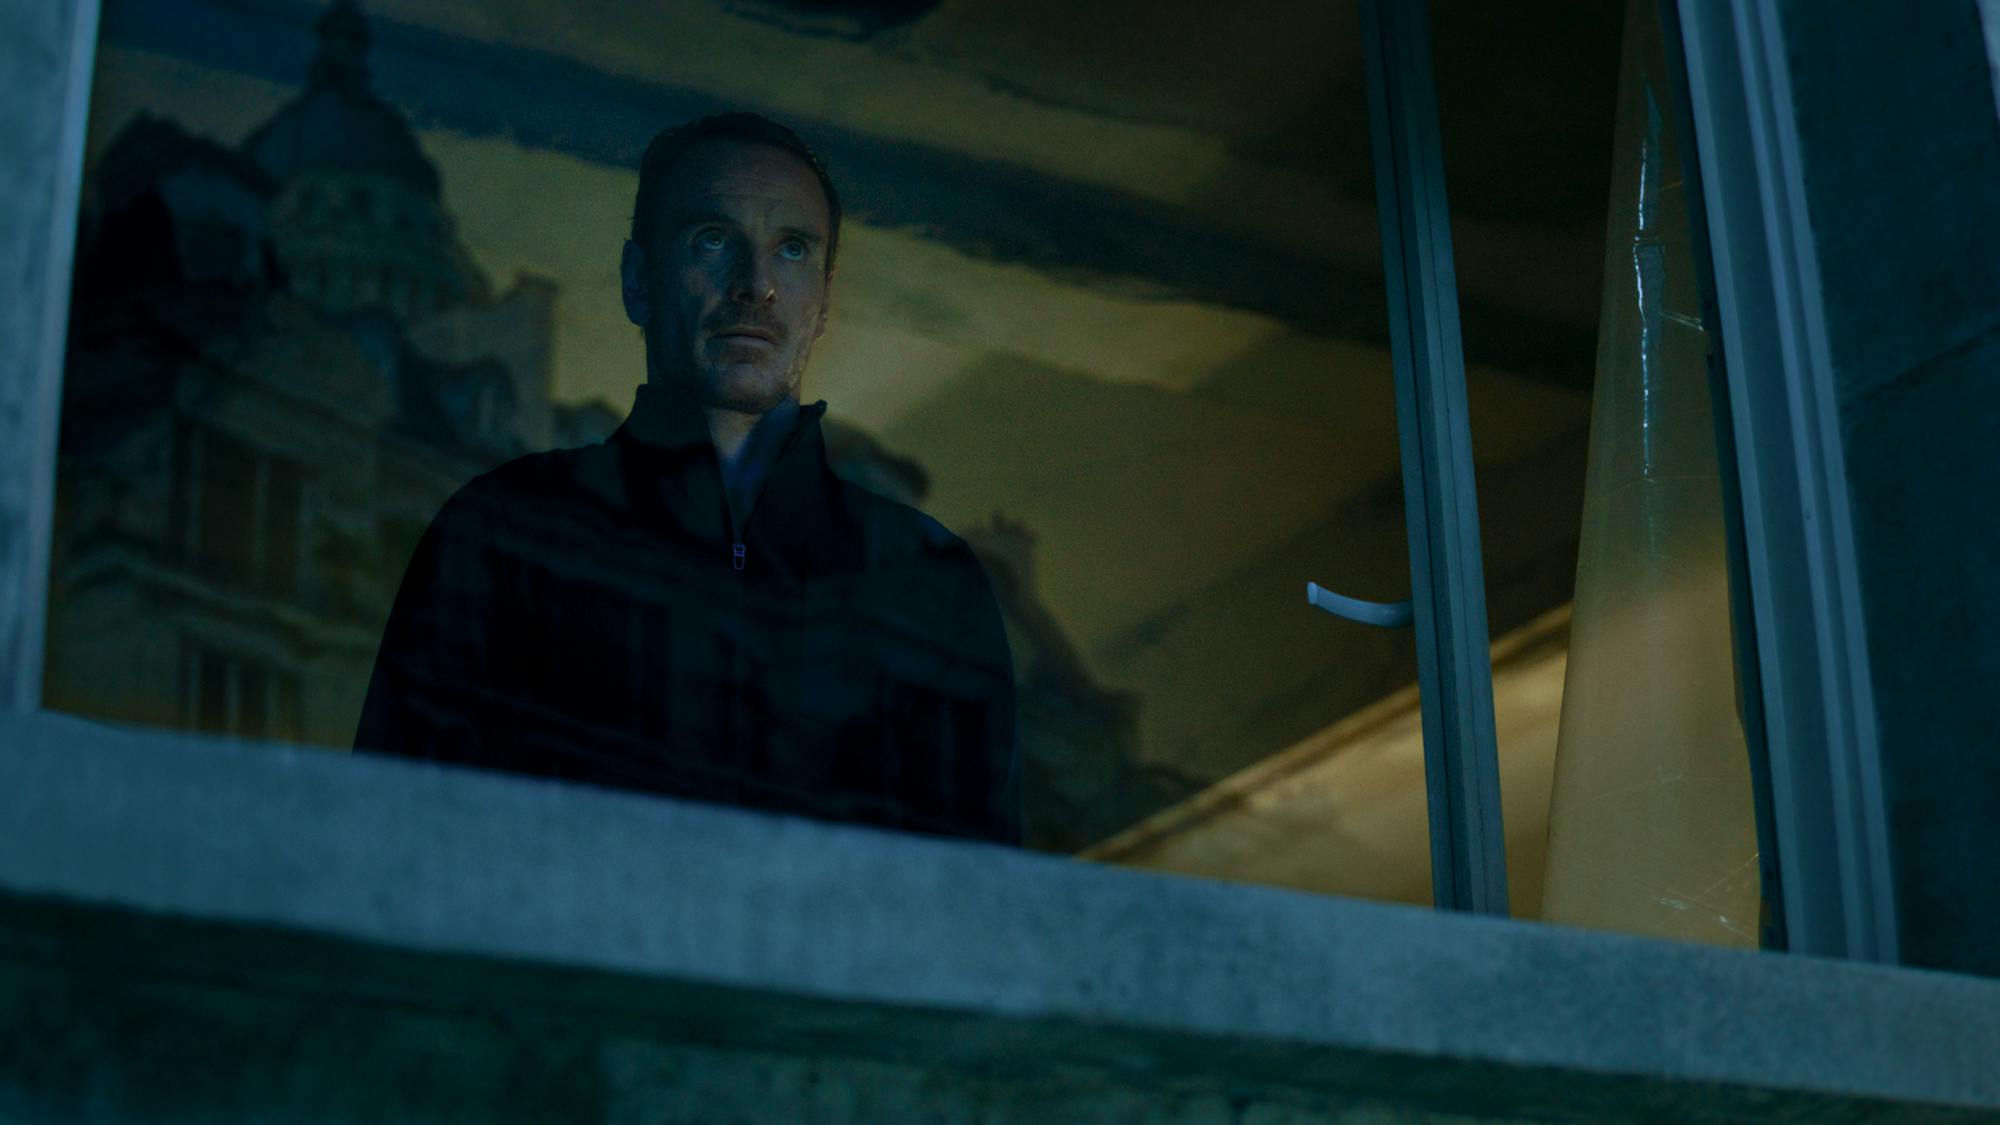 The Killer (Michael Fassbender) looks through a window. He wears all black and looks intense!